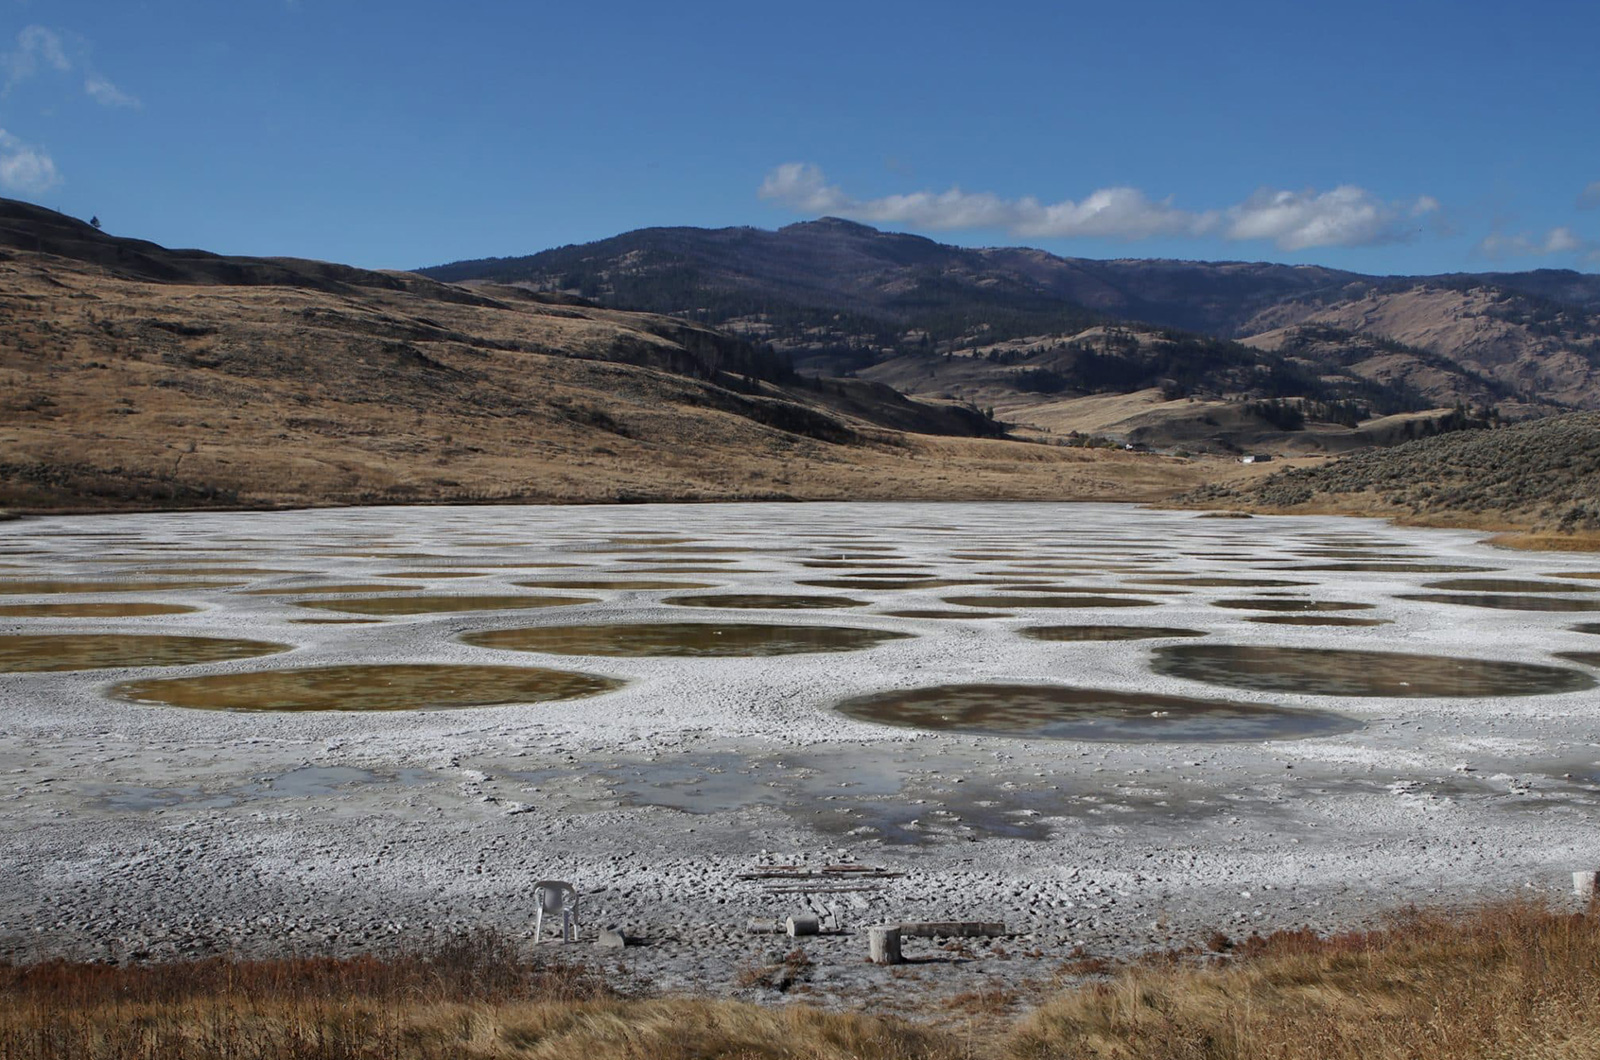 Kłlilx’w (Spotted Lake) near Osoyoos, BC, a lake with blobby spots in it due to minerals